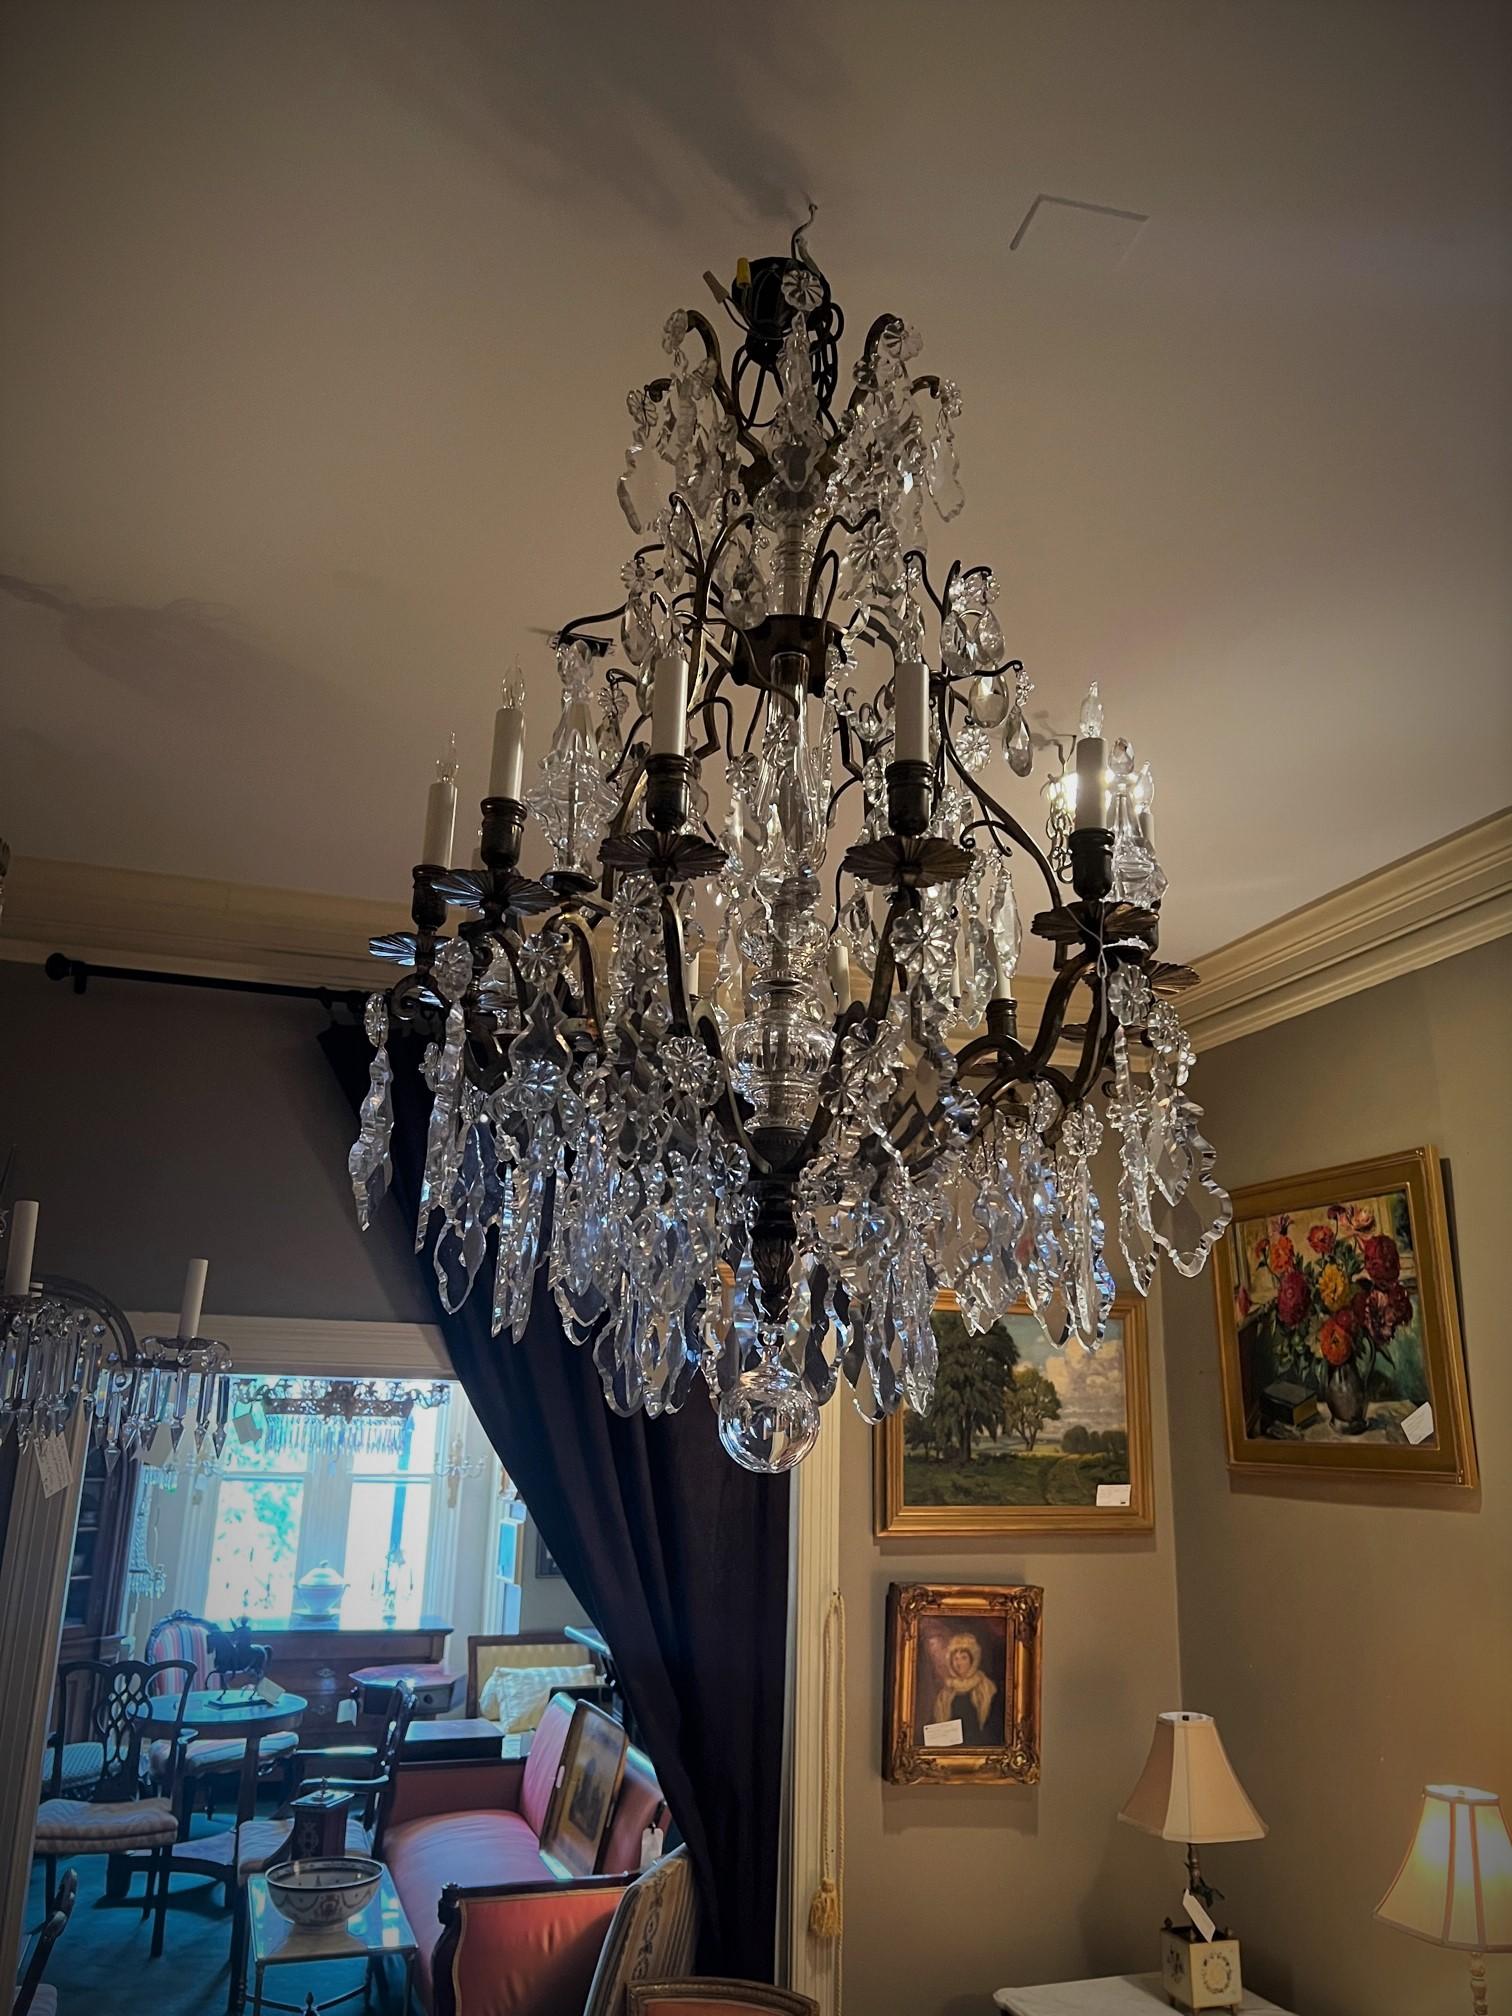 Of all the Rococo style large chandeliers we've had over many years, we think this one is the best. It is a faithful reproduction of the style of chandelier that was popular in France in the mid-18th Century. The frame is expertly hand-cast gilt